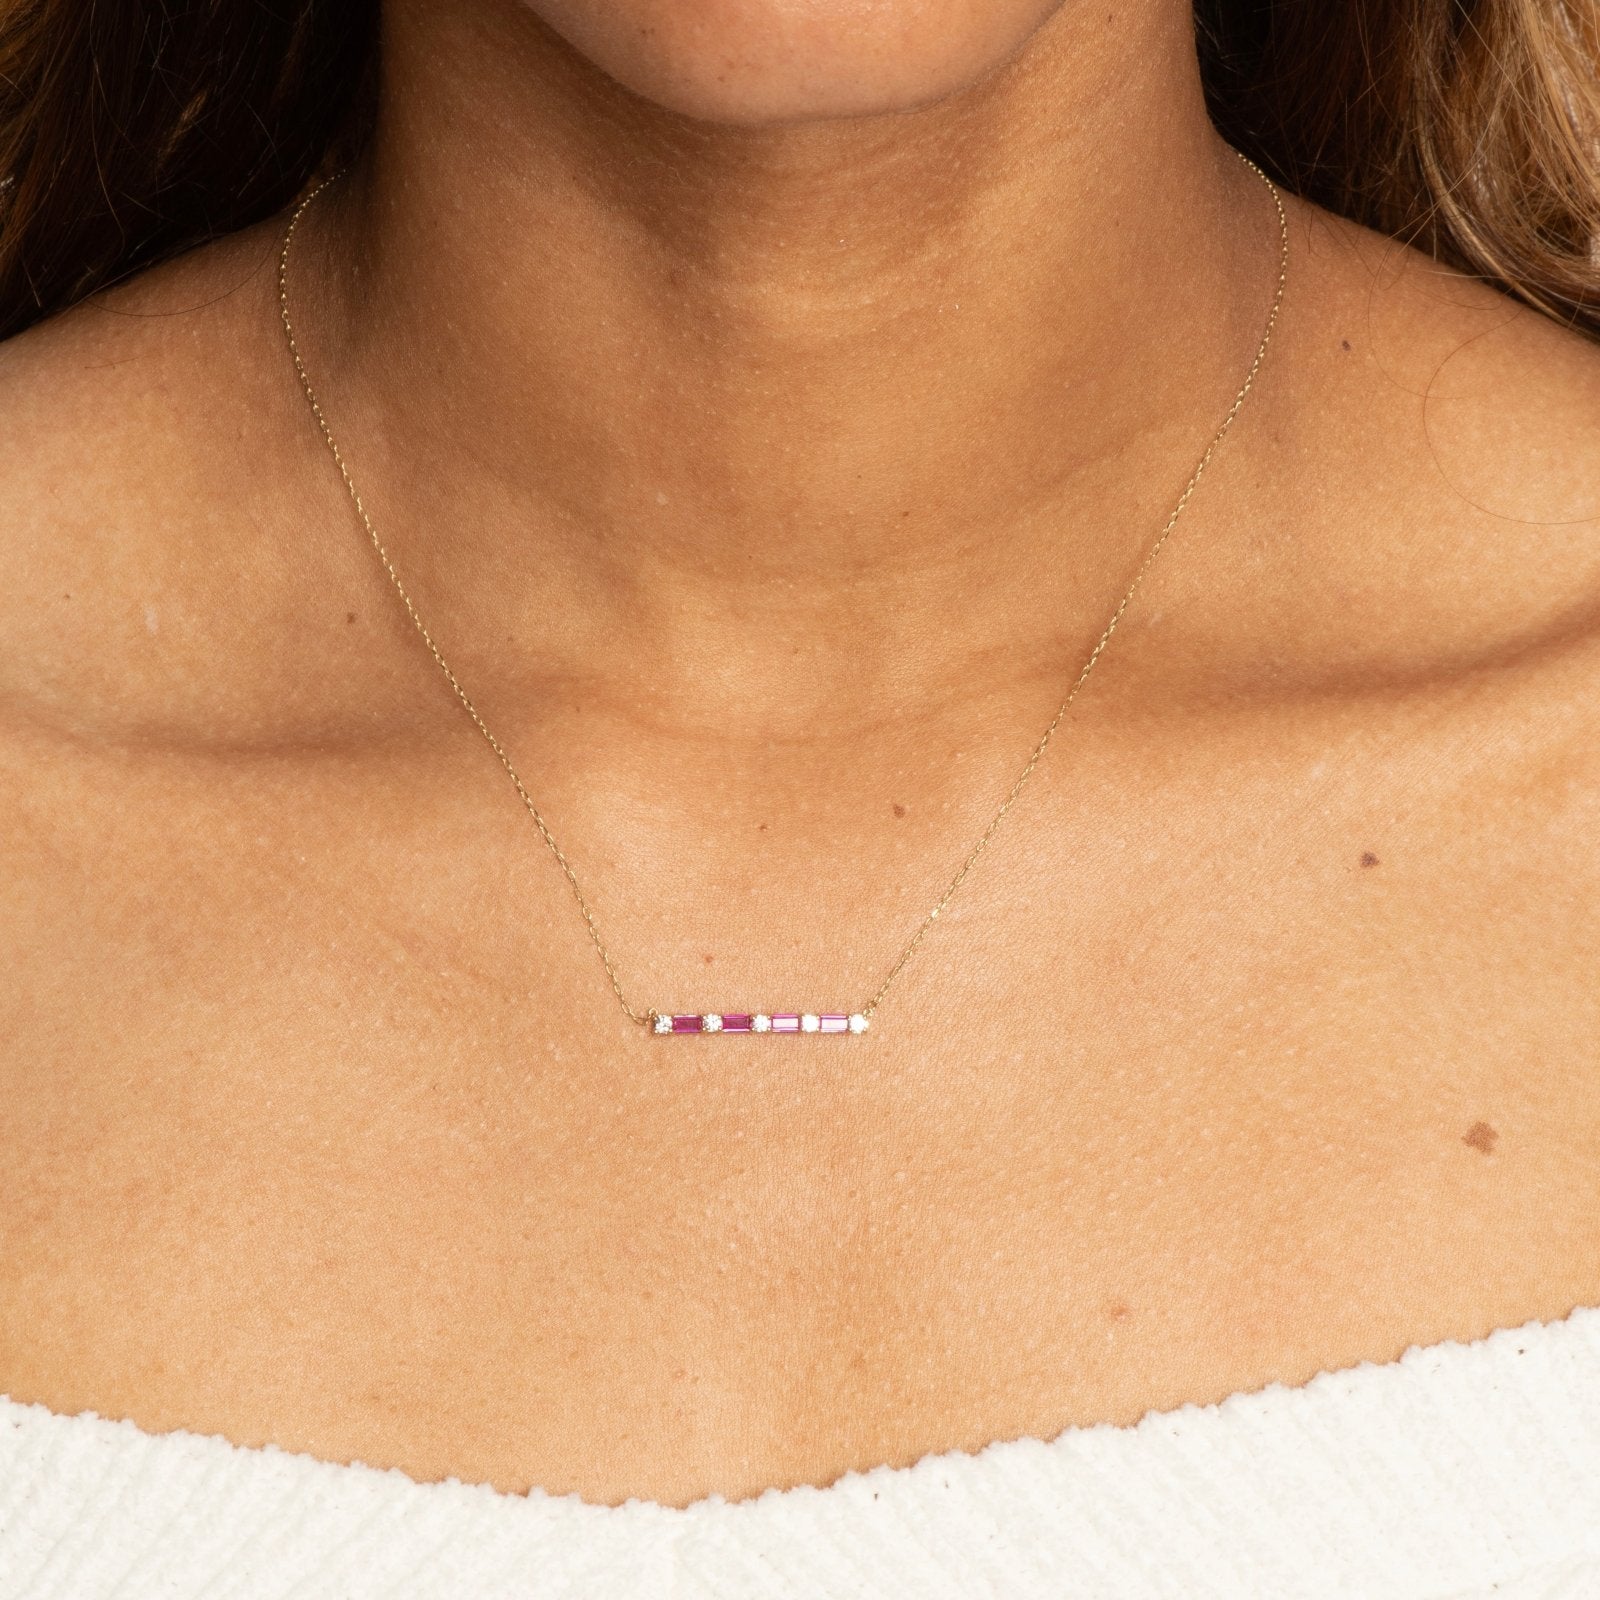 Alternating Emerald Cut Ruby and Round White Sapphire Bar Necklace Necklaces Estella Collection #product_description# 32691 Layering Necklace Made to Order Ruby #tag4# #tag5# #tag6# #tag7# #tag8# #tag9# #tag10#